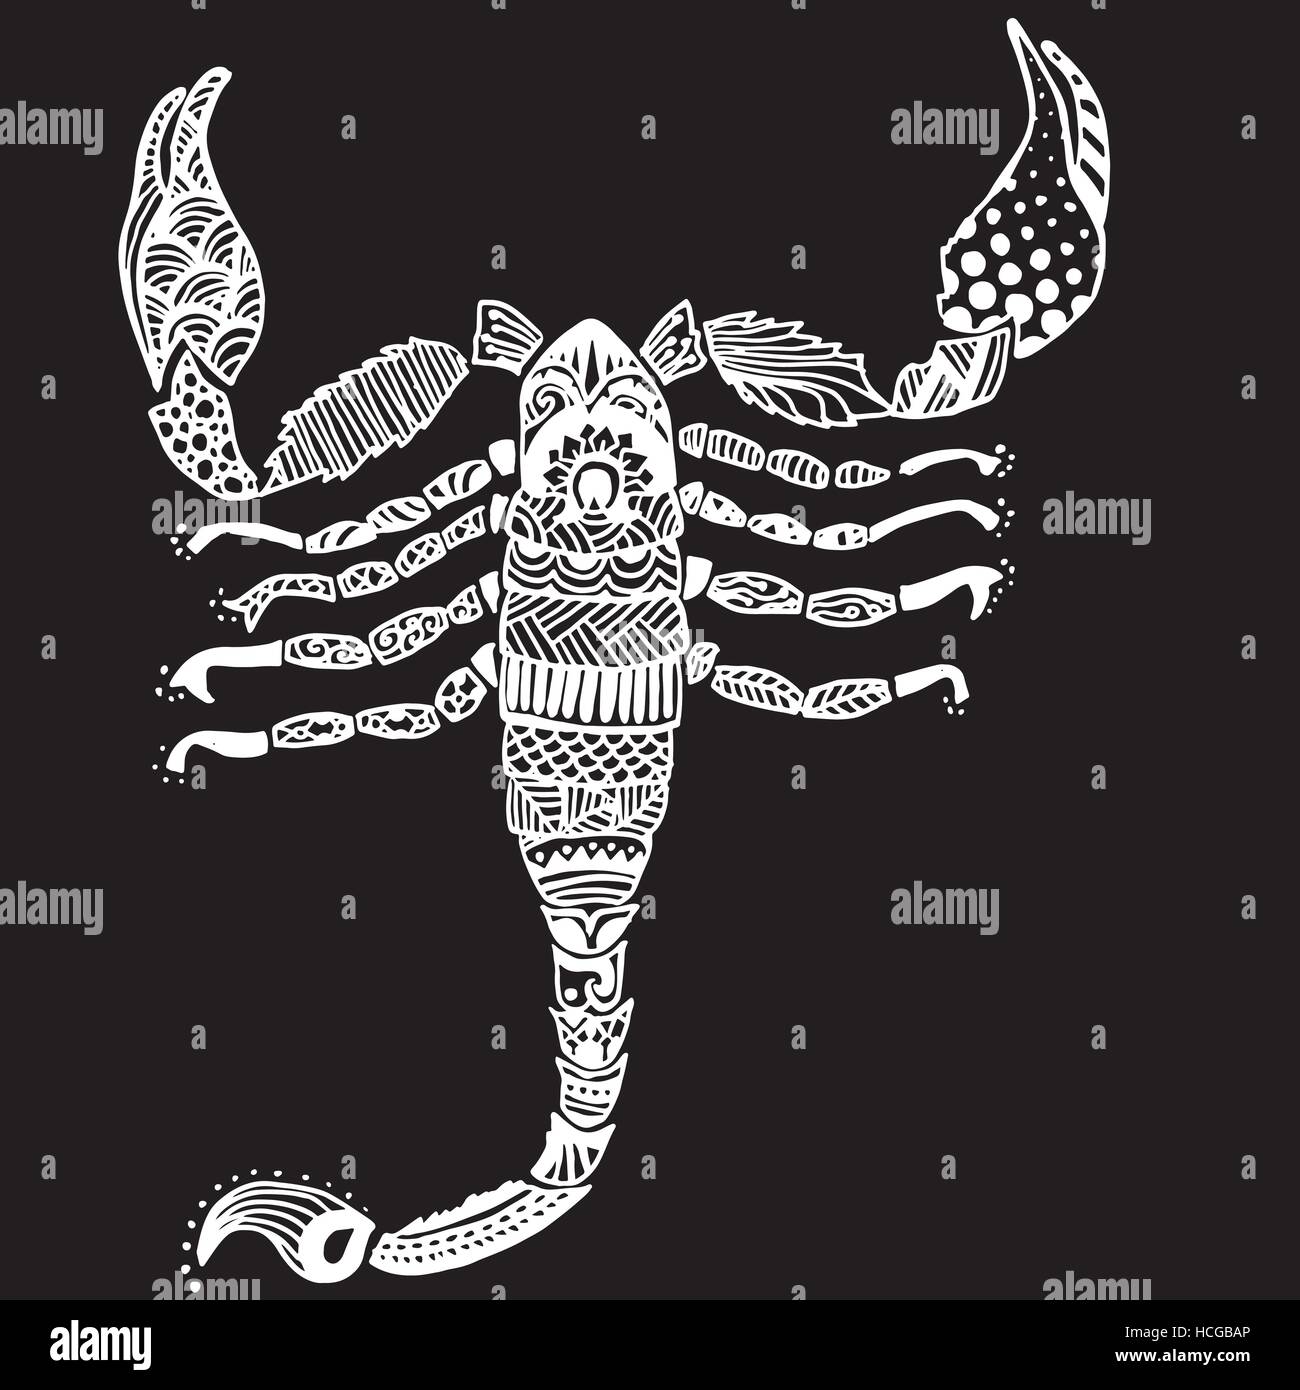 Doodle design of scorpion. Adult coloring book. Vector illustration. Stock Vector